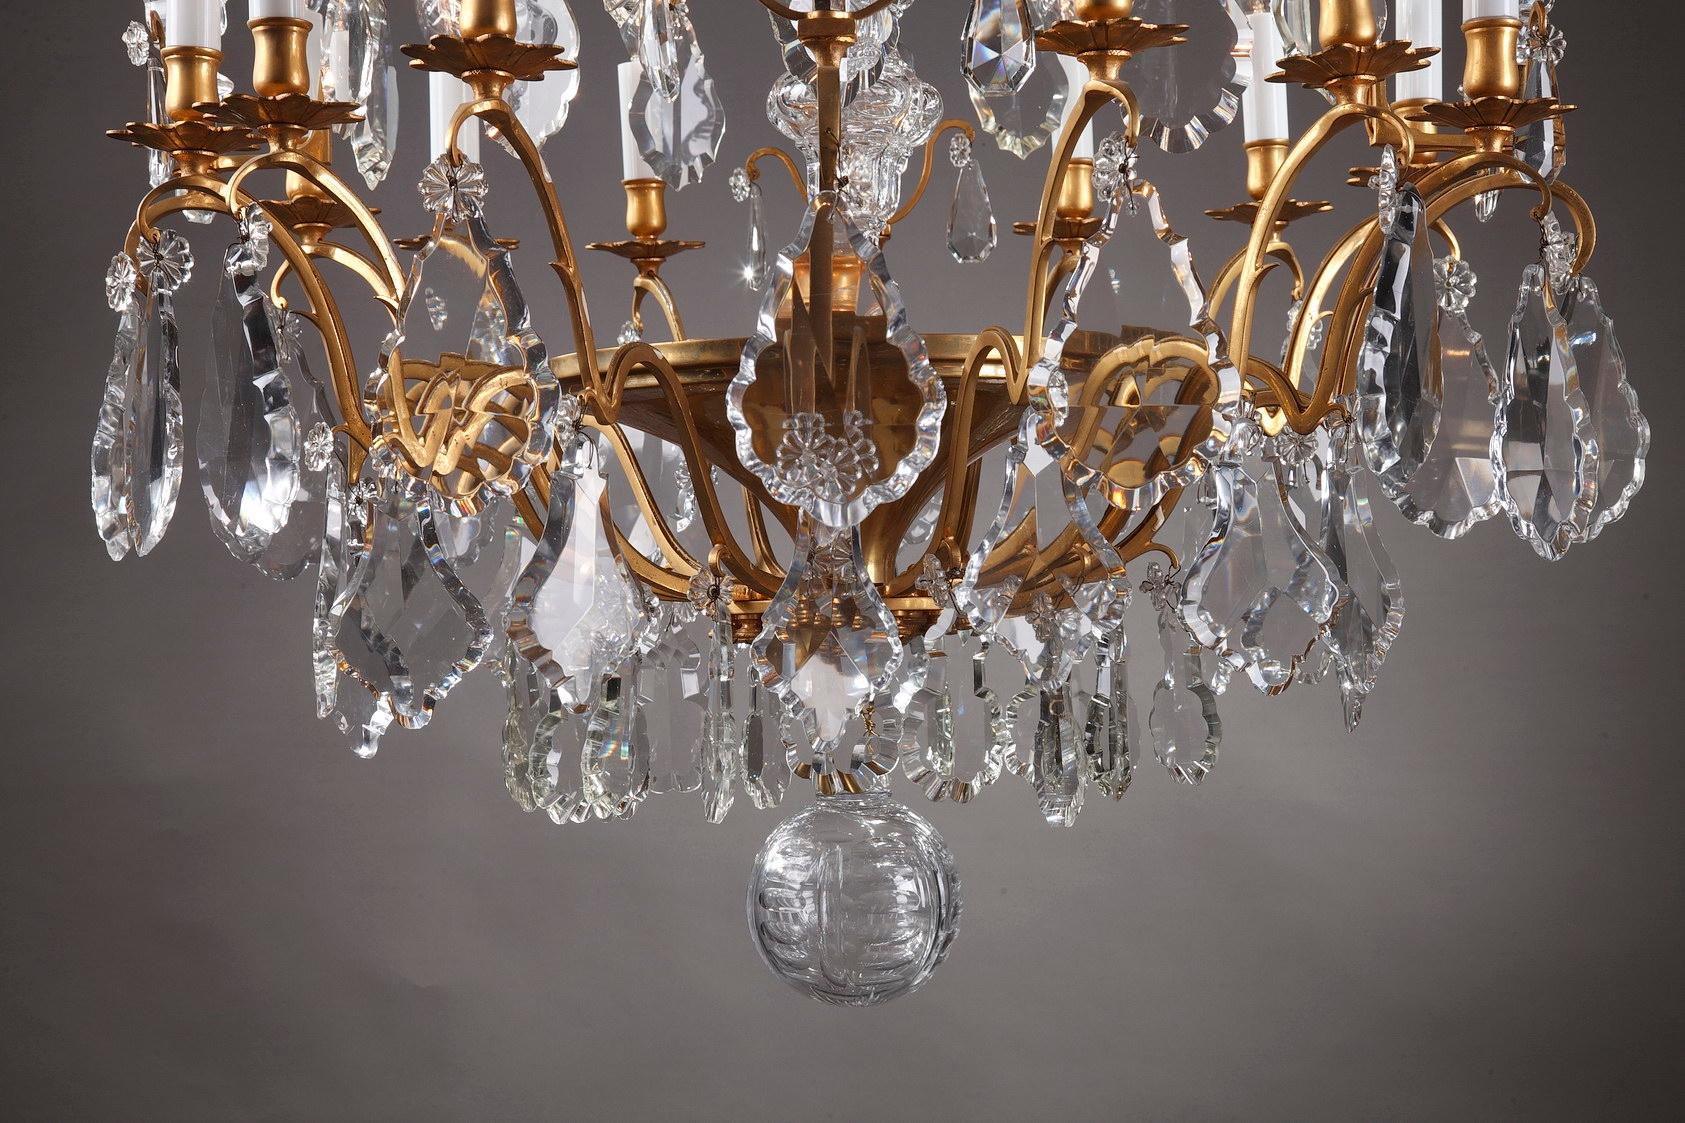 Very large late 19th century crystal chandelier. This exquisit ceiling light features oversized faceted drops, flowers and luminous daggers of fine cut-crystal. The 12 lights of this fixture are supported by scrolling branches cast in ormolu, or